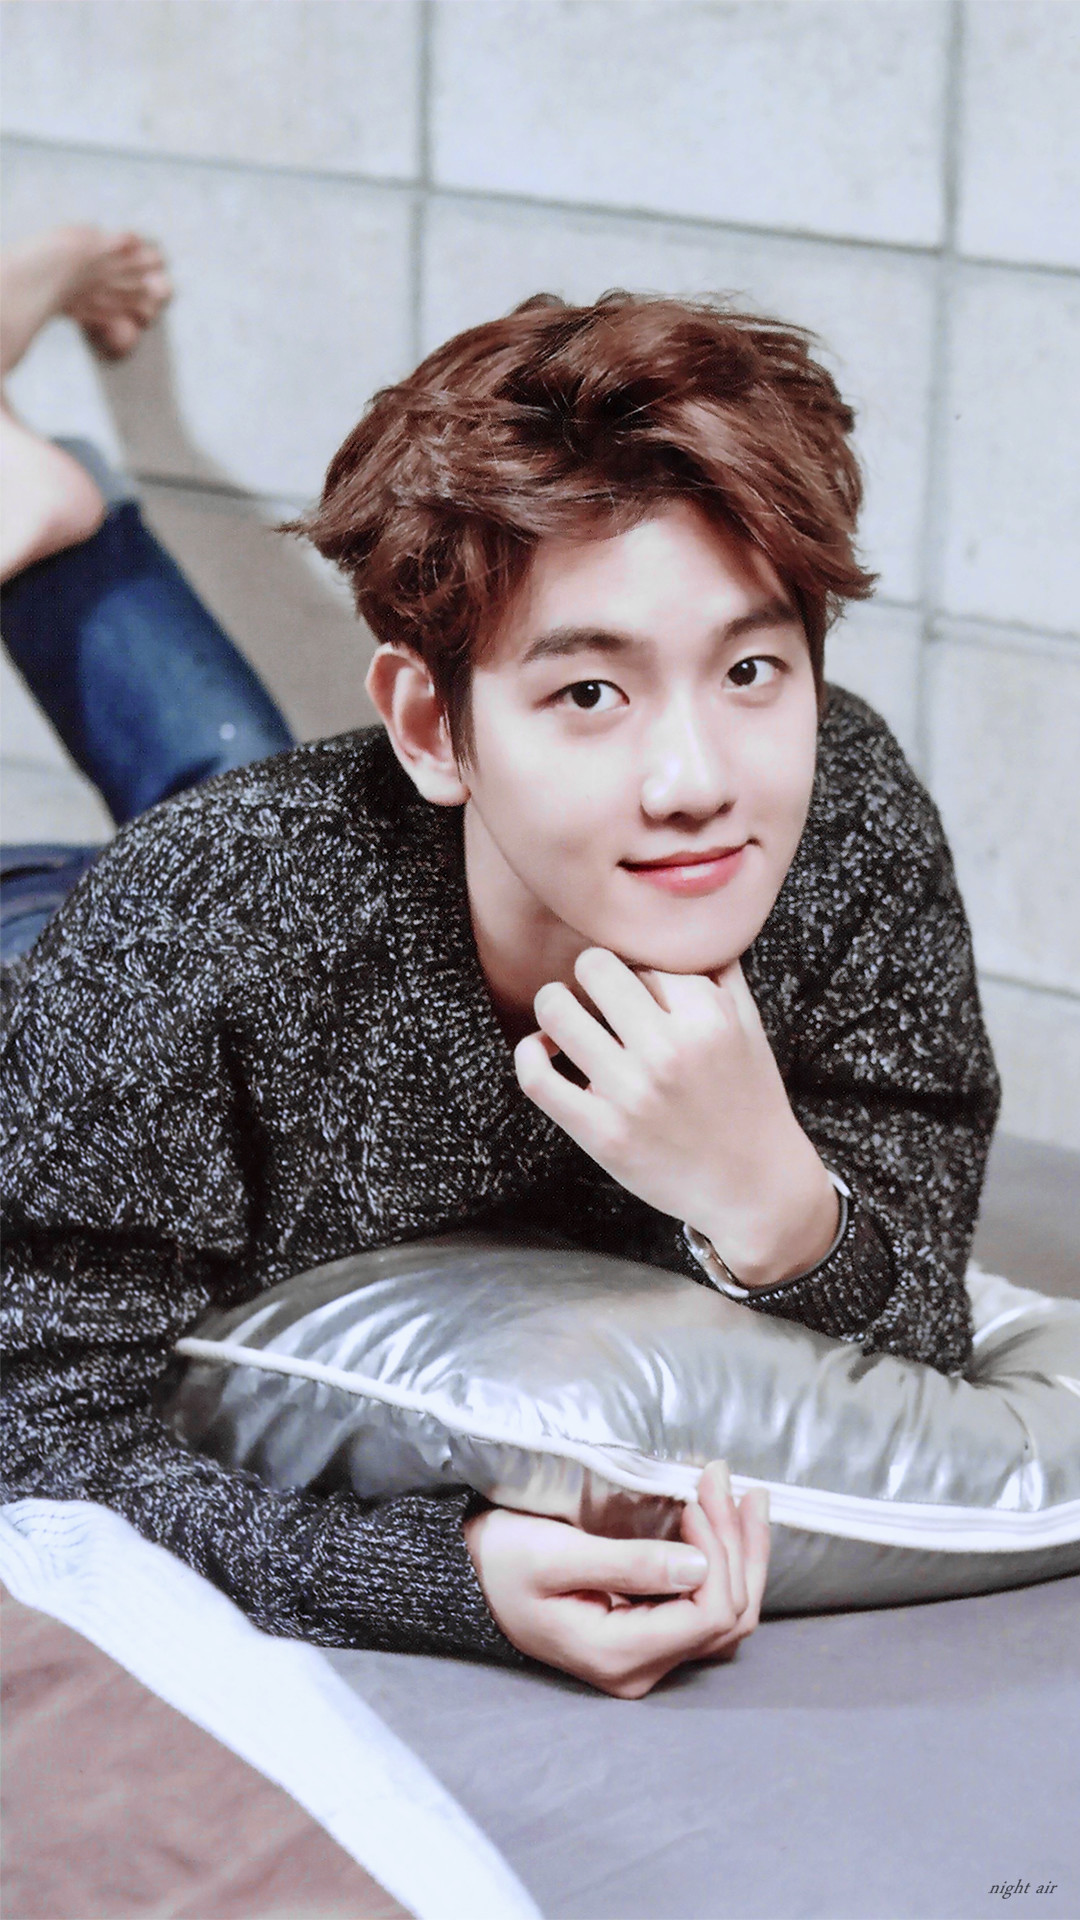 1080x1920 Baekhyun.. it's sexy that he's lying on a bed of course, but I